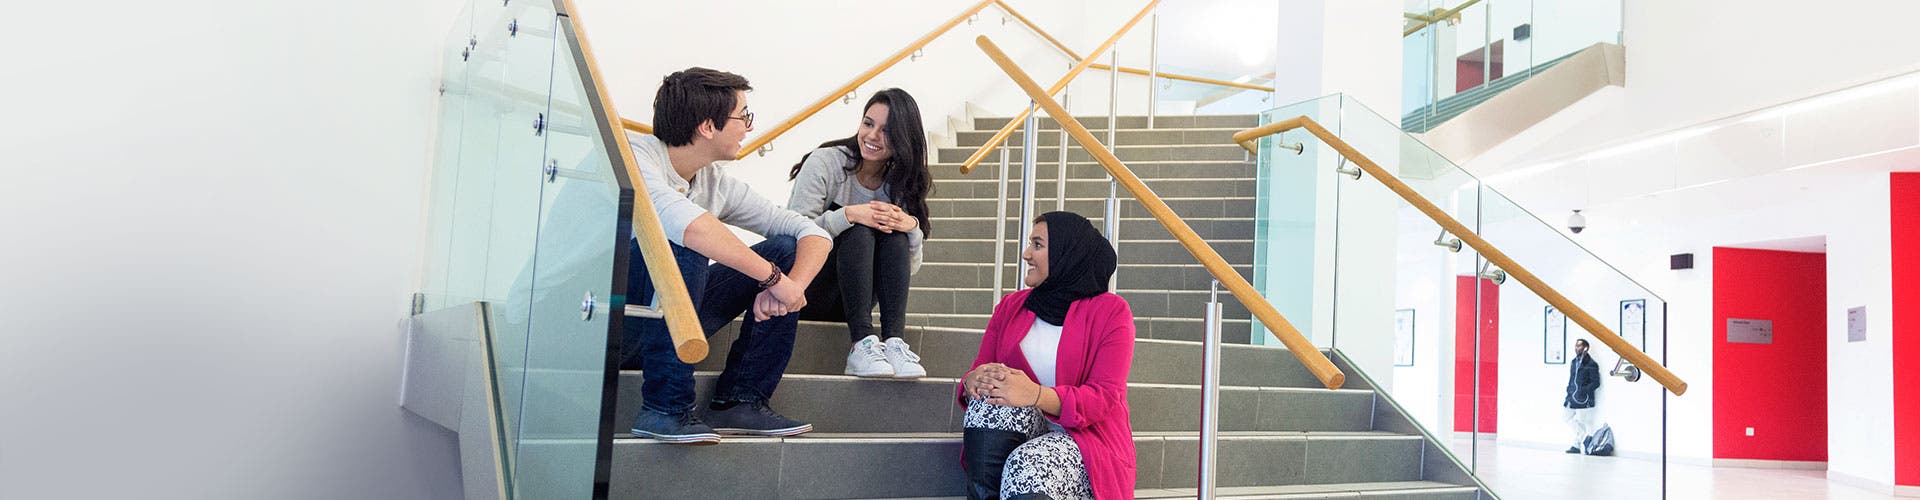 Students chatting on a staircase.